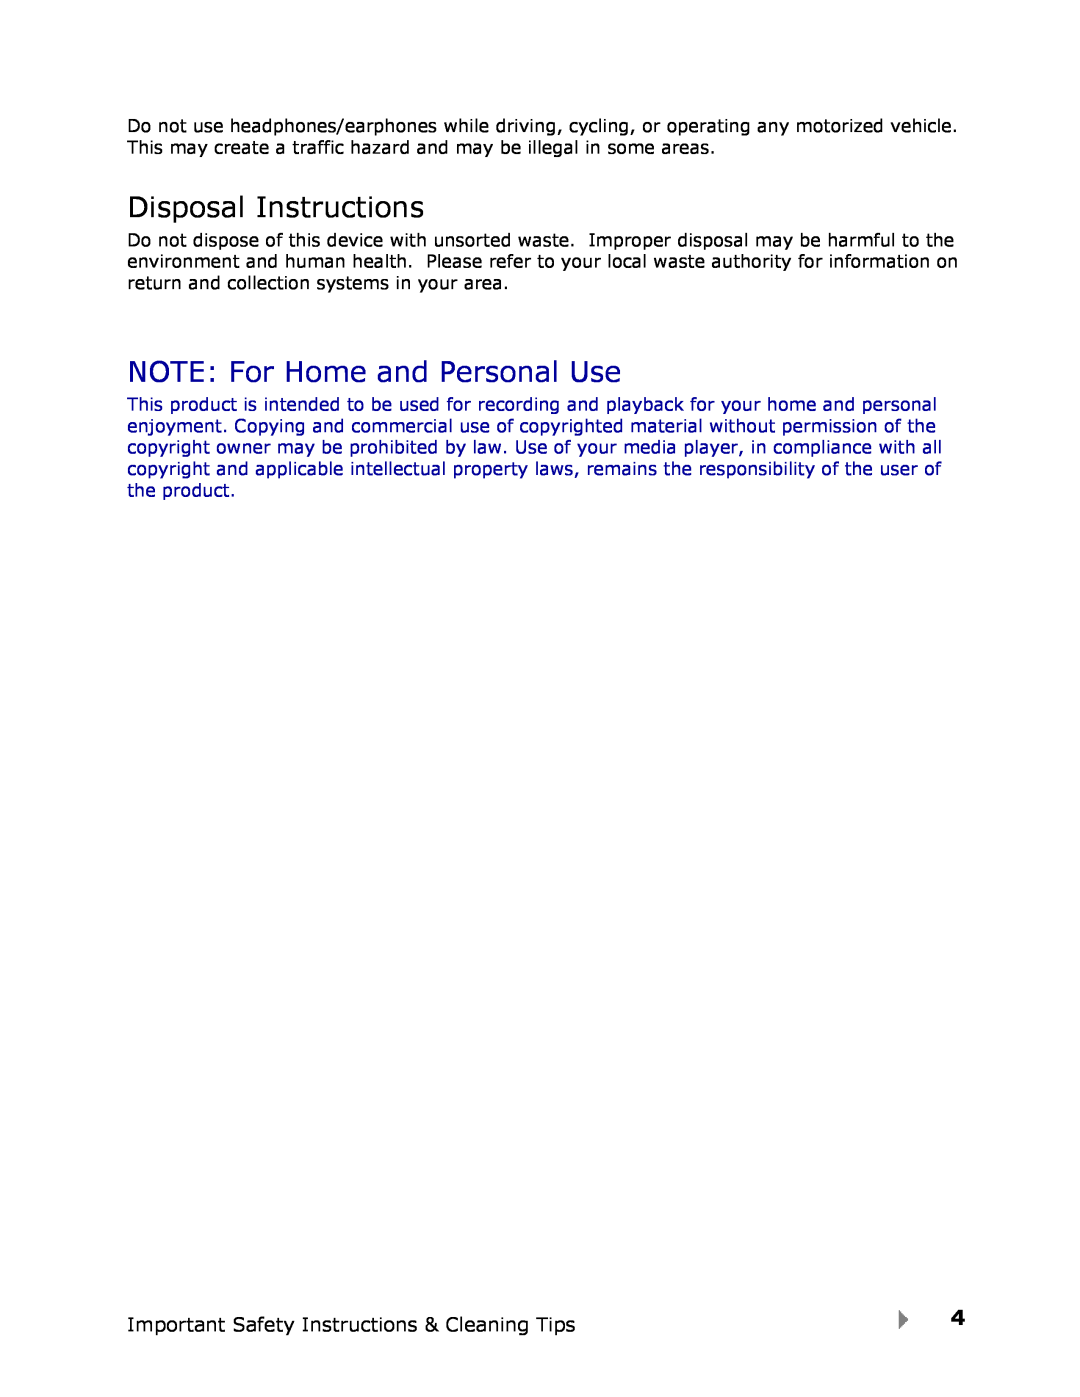 SanDisk View user manual Disposal Instructions, NOTE For Home and Personal Use 